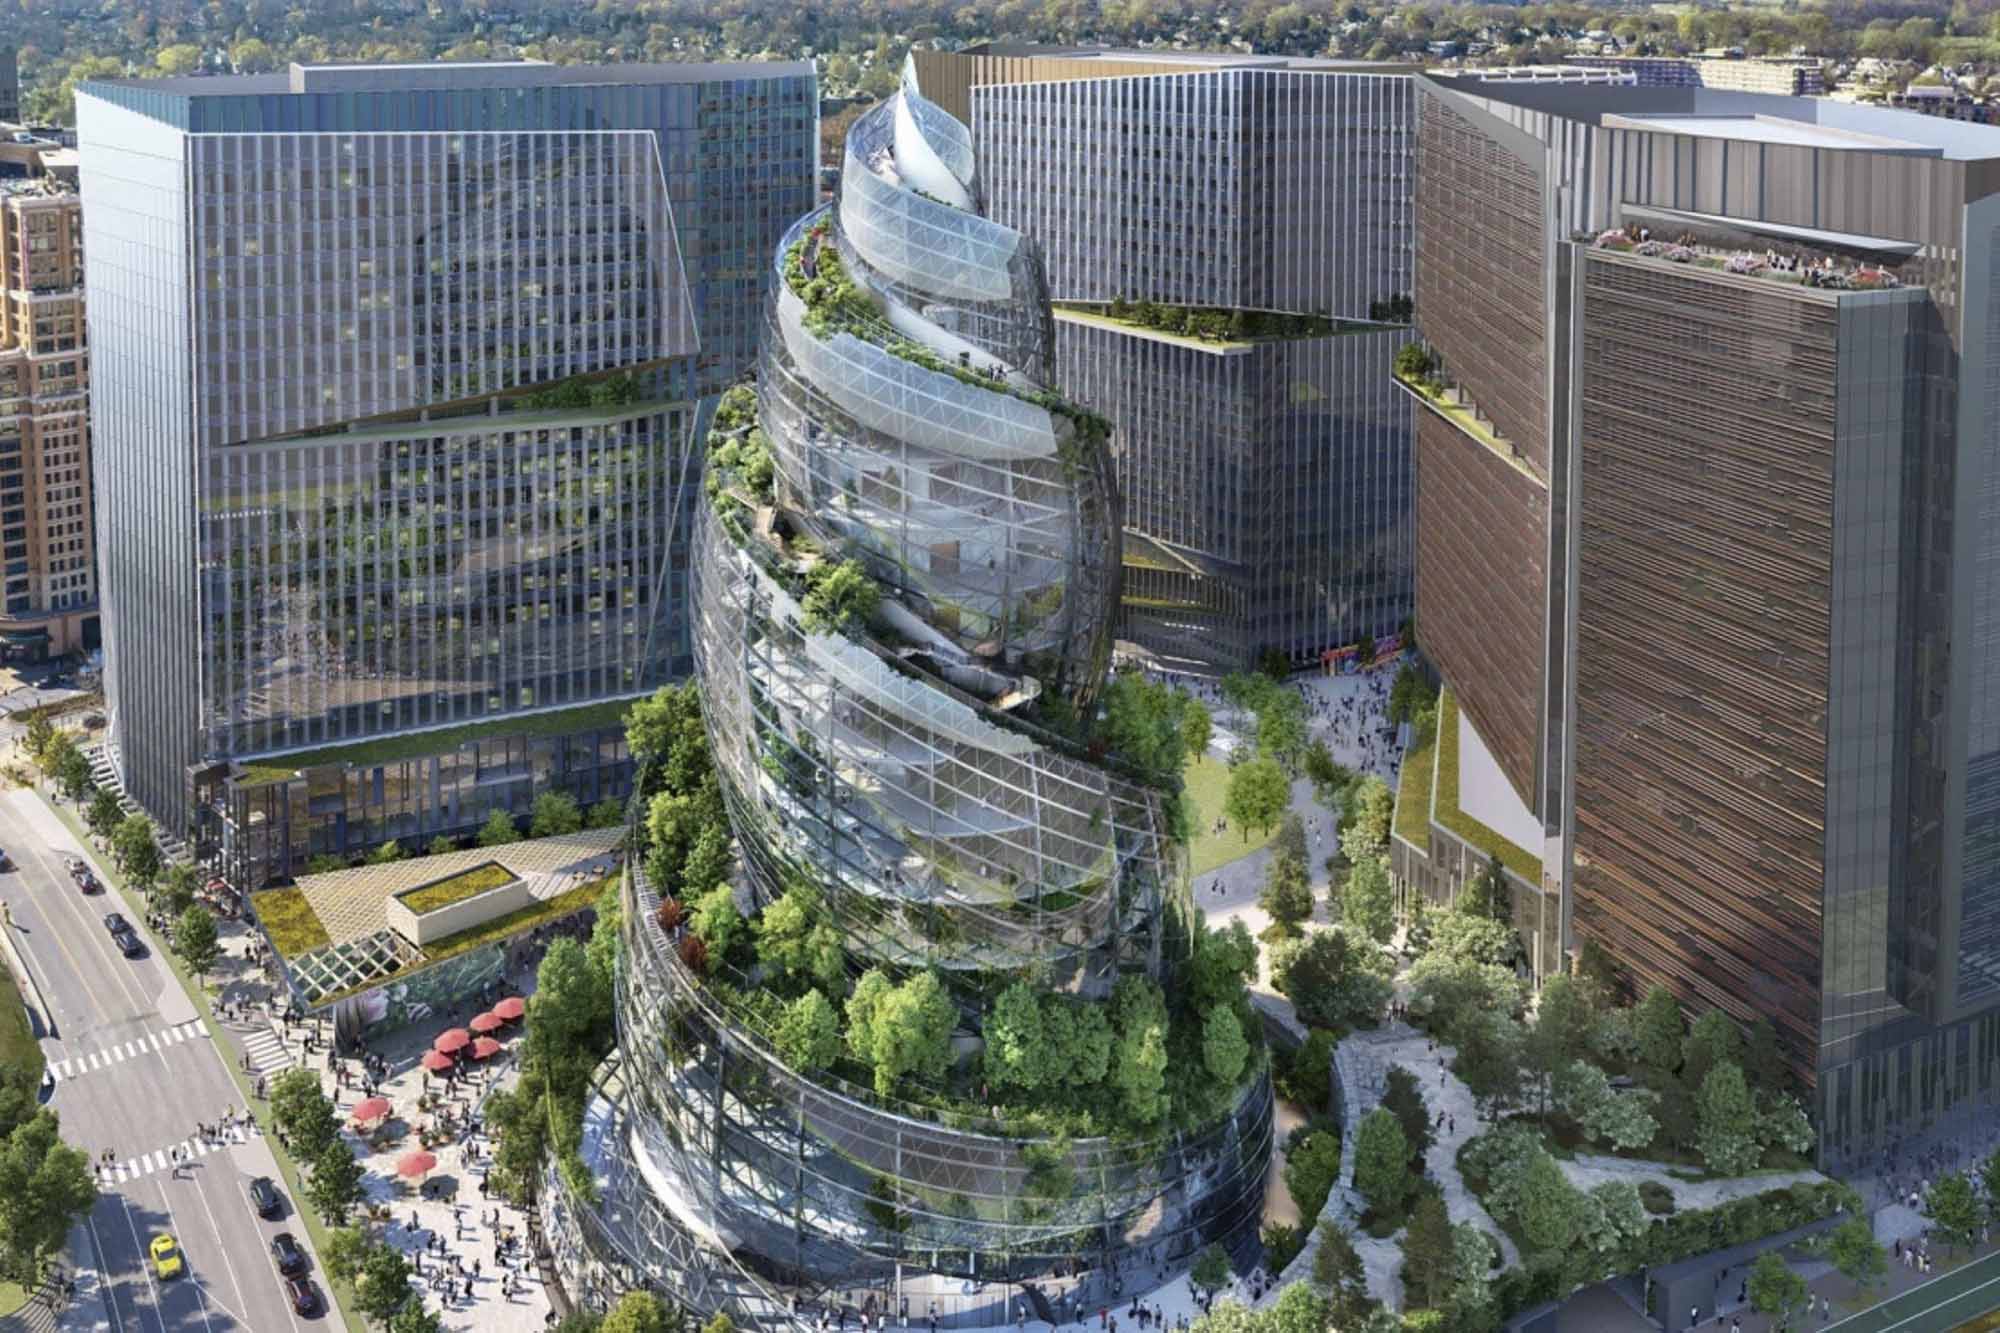 Vertical Glass Spiraled building with trees between each spiral